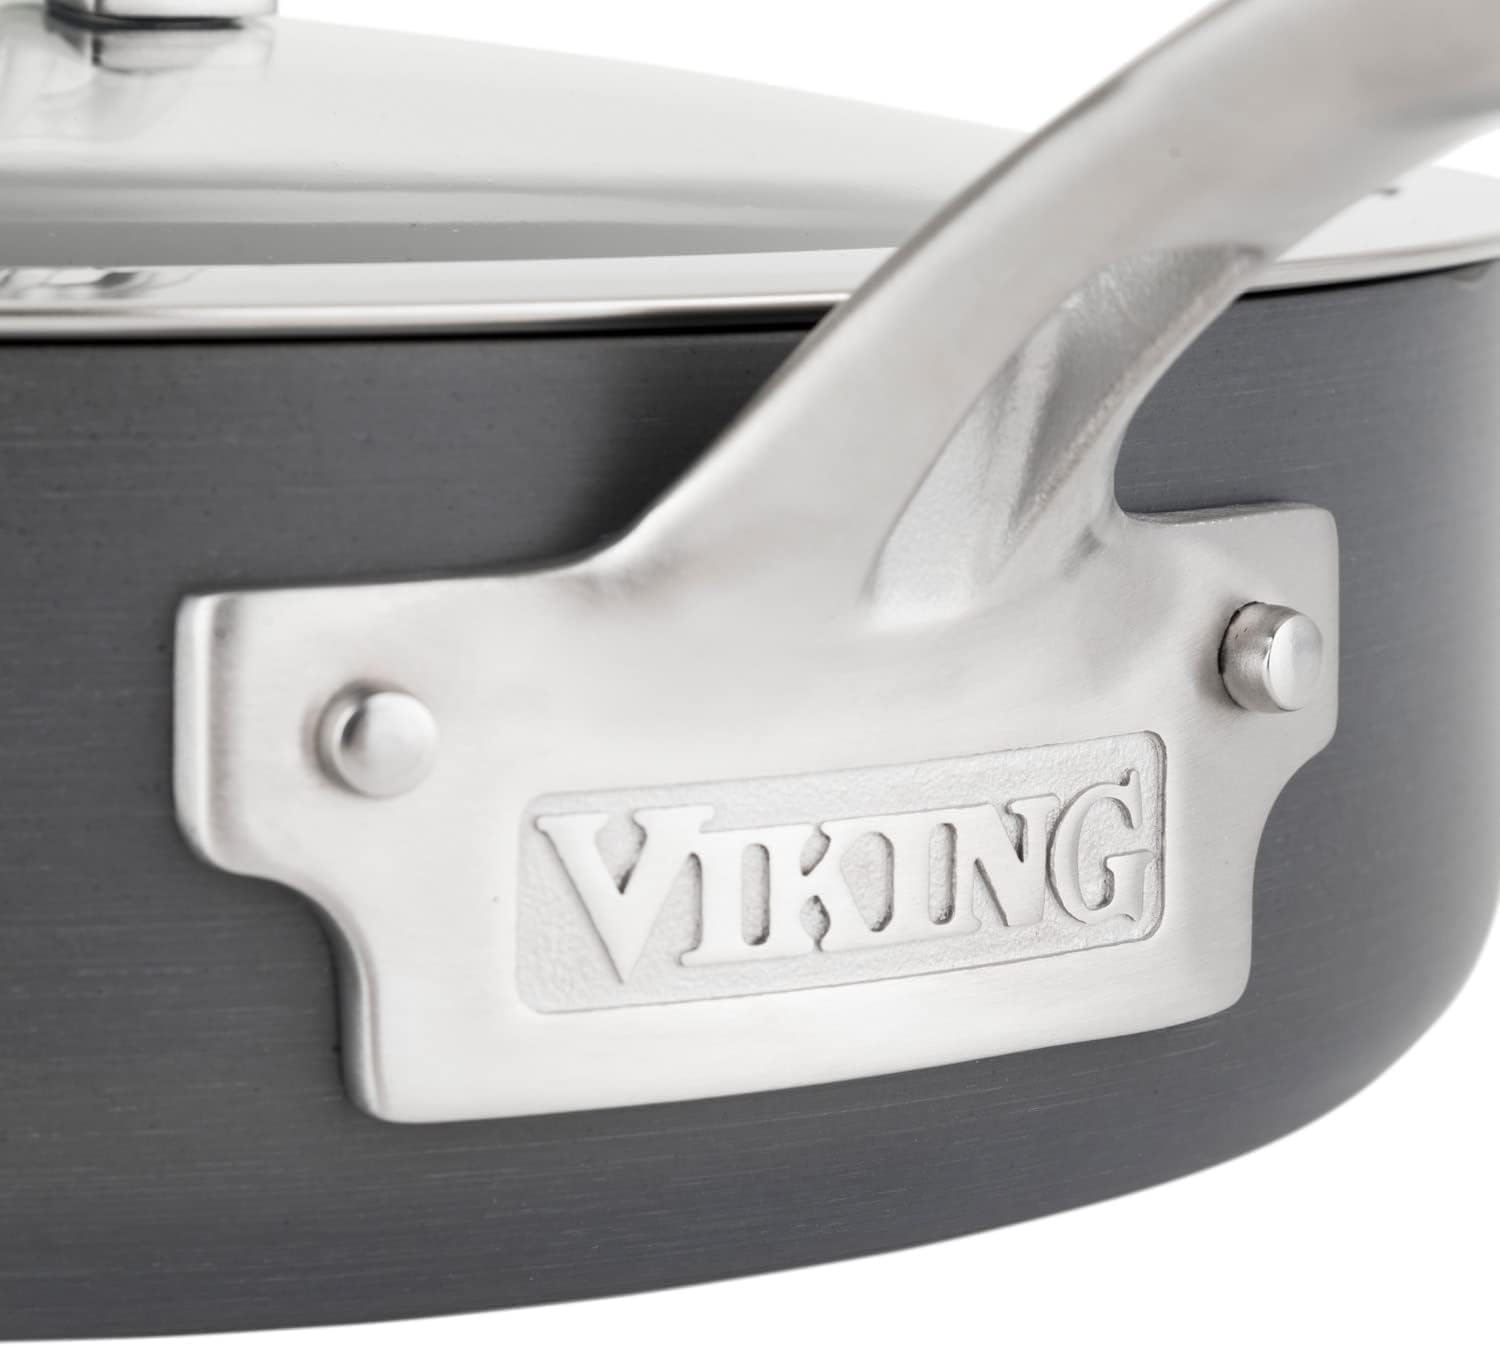 Viking Hard Anodized Nonstick 1-Quart Sauce Pan with Glass Lid – Viking  Culinary Products